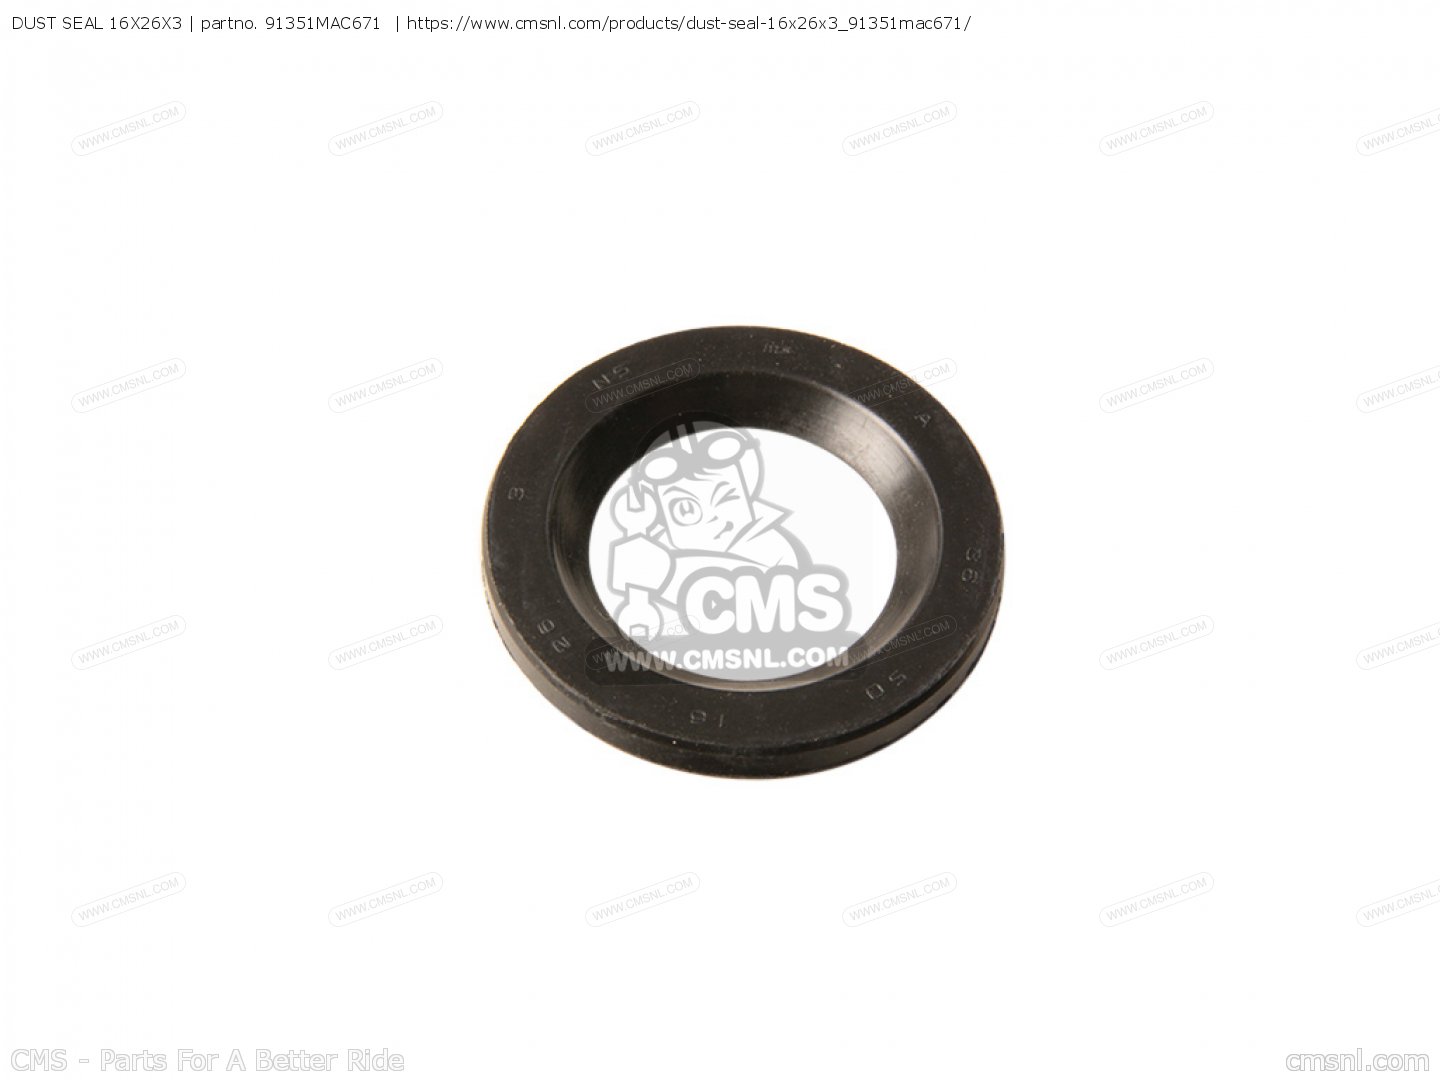 DUST SEAL 16X26X3 for CRF450R 2005 (5) JAPAN PE05-130.131.135 - order ...